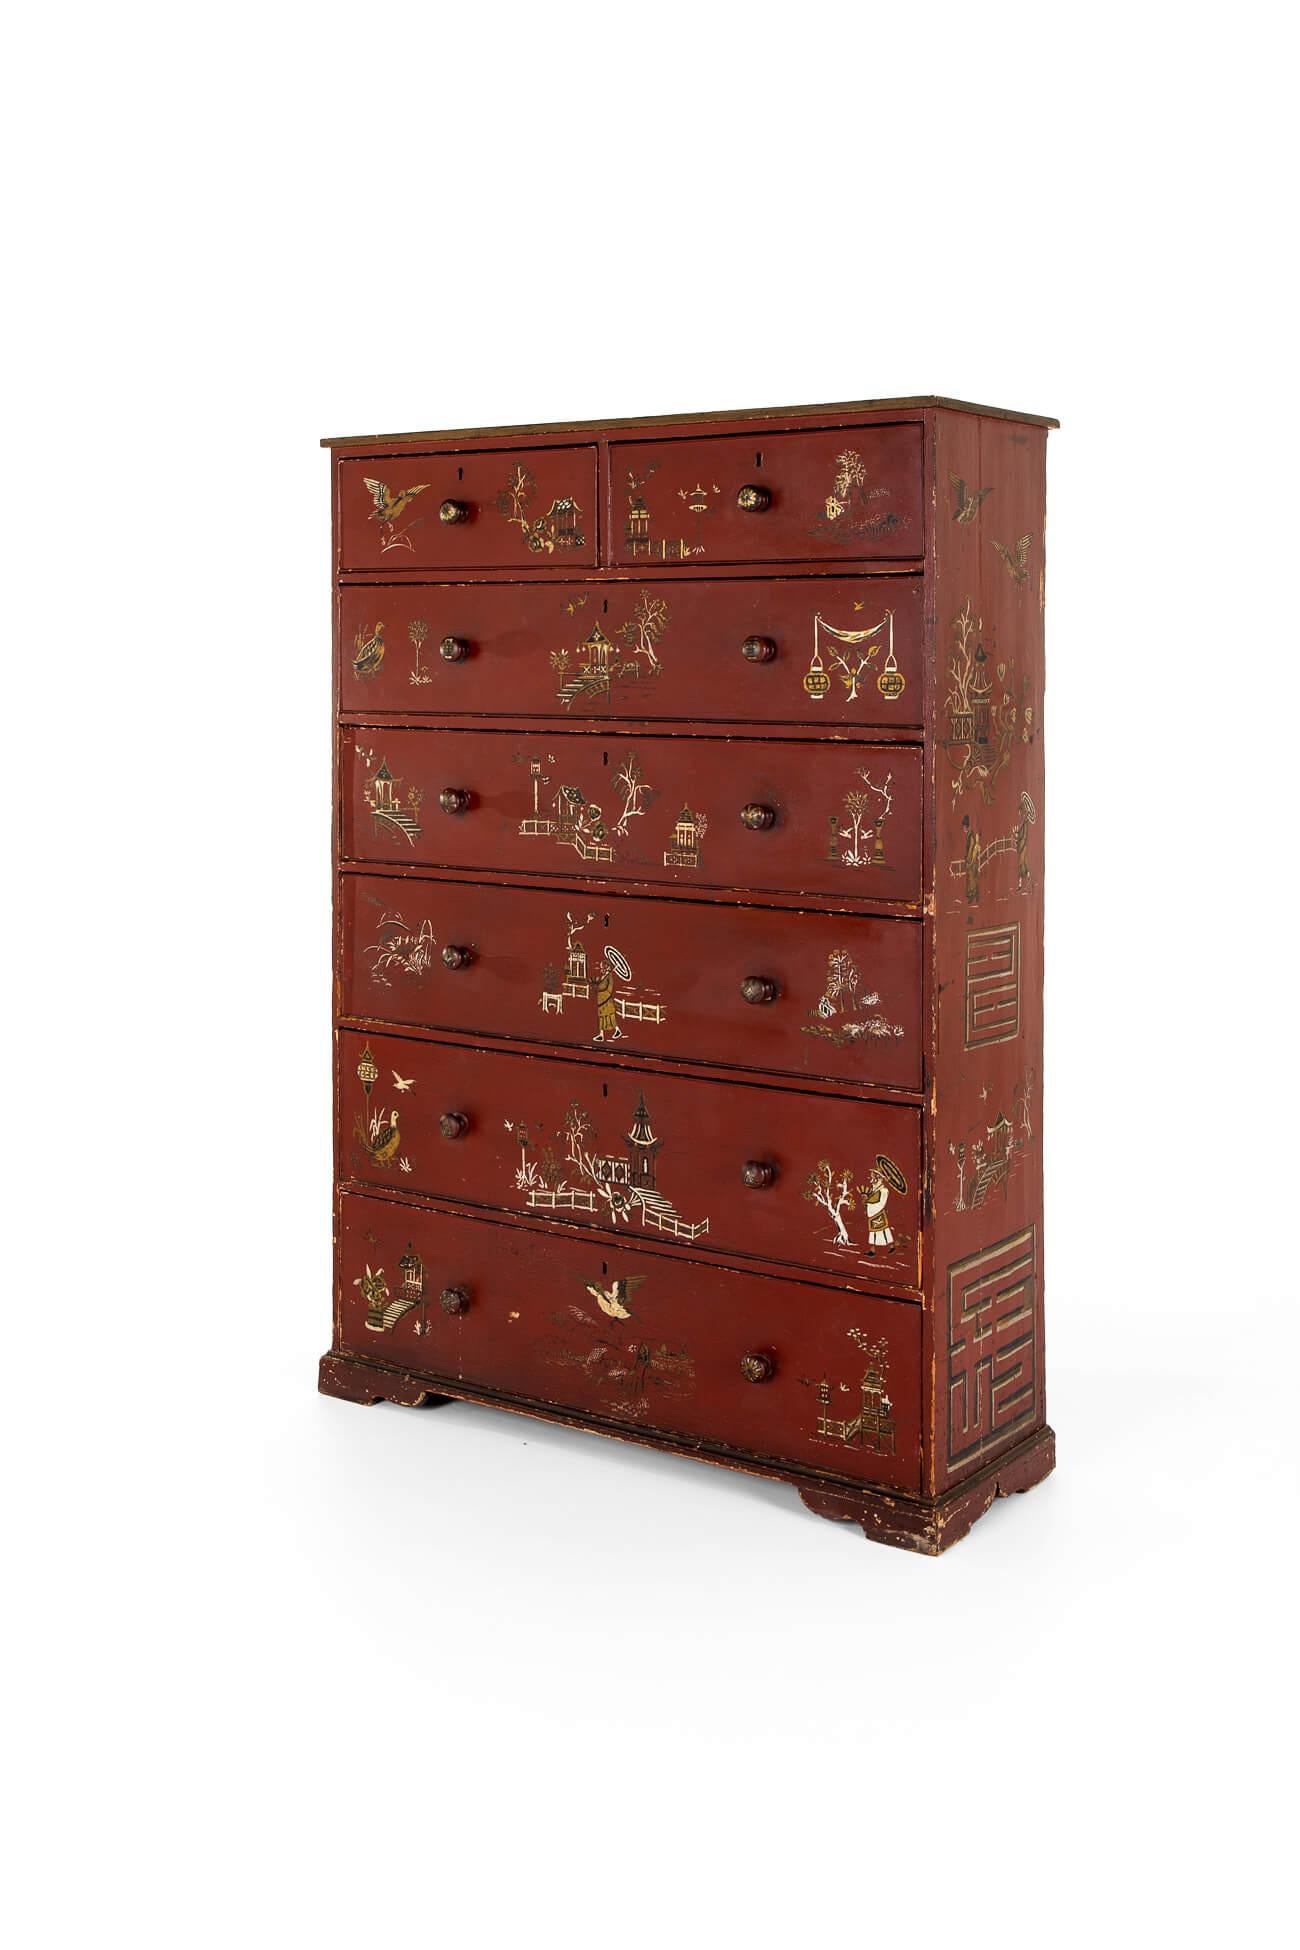 A Georgian tall chest in pine with two short over five long drawers raised on bracket feet.

Delightful Oxblood-coloured paint with later chinoiserie detailing.

English, circa 1800.

H: 151.50 CM  H: 59.6 INCHES

W: 104 CM  W: 40.9 INCHES

D: 36.5